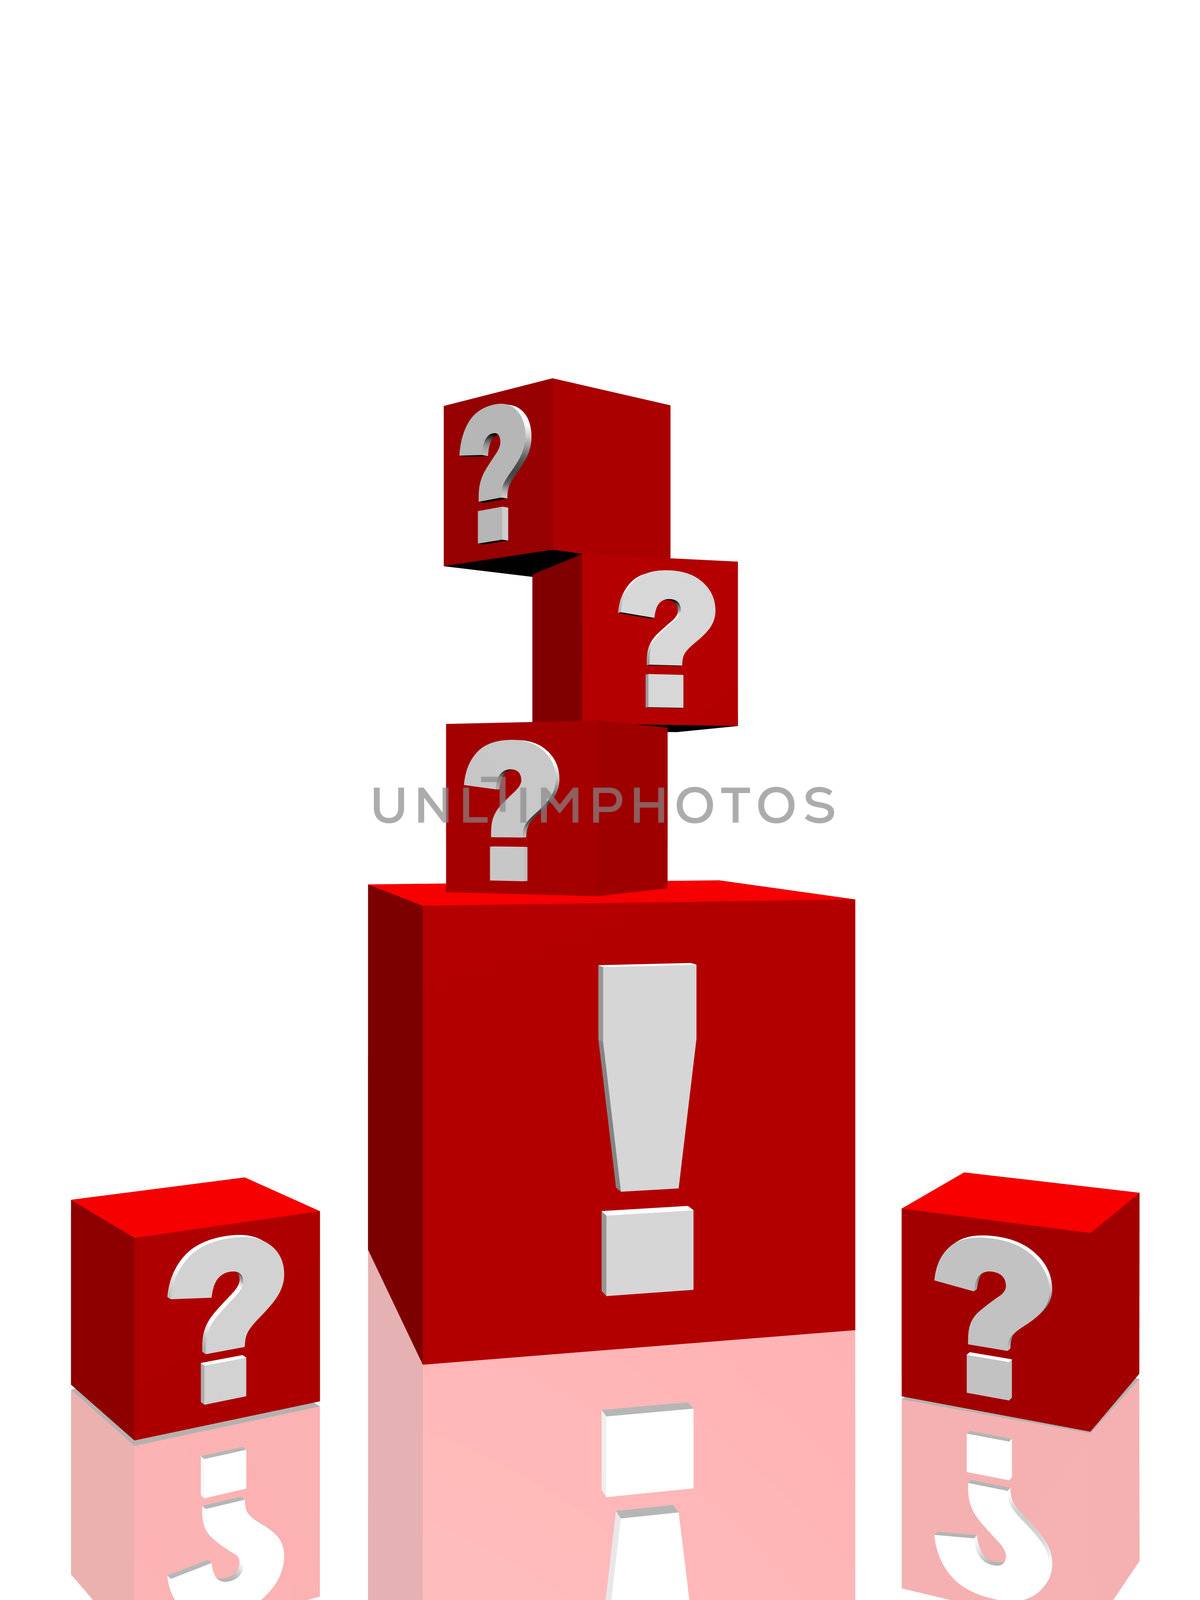 Several red cubes with question marks around a single big one with an exclamation mark. All on white background.